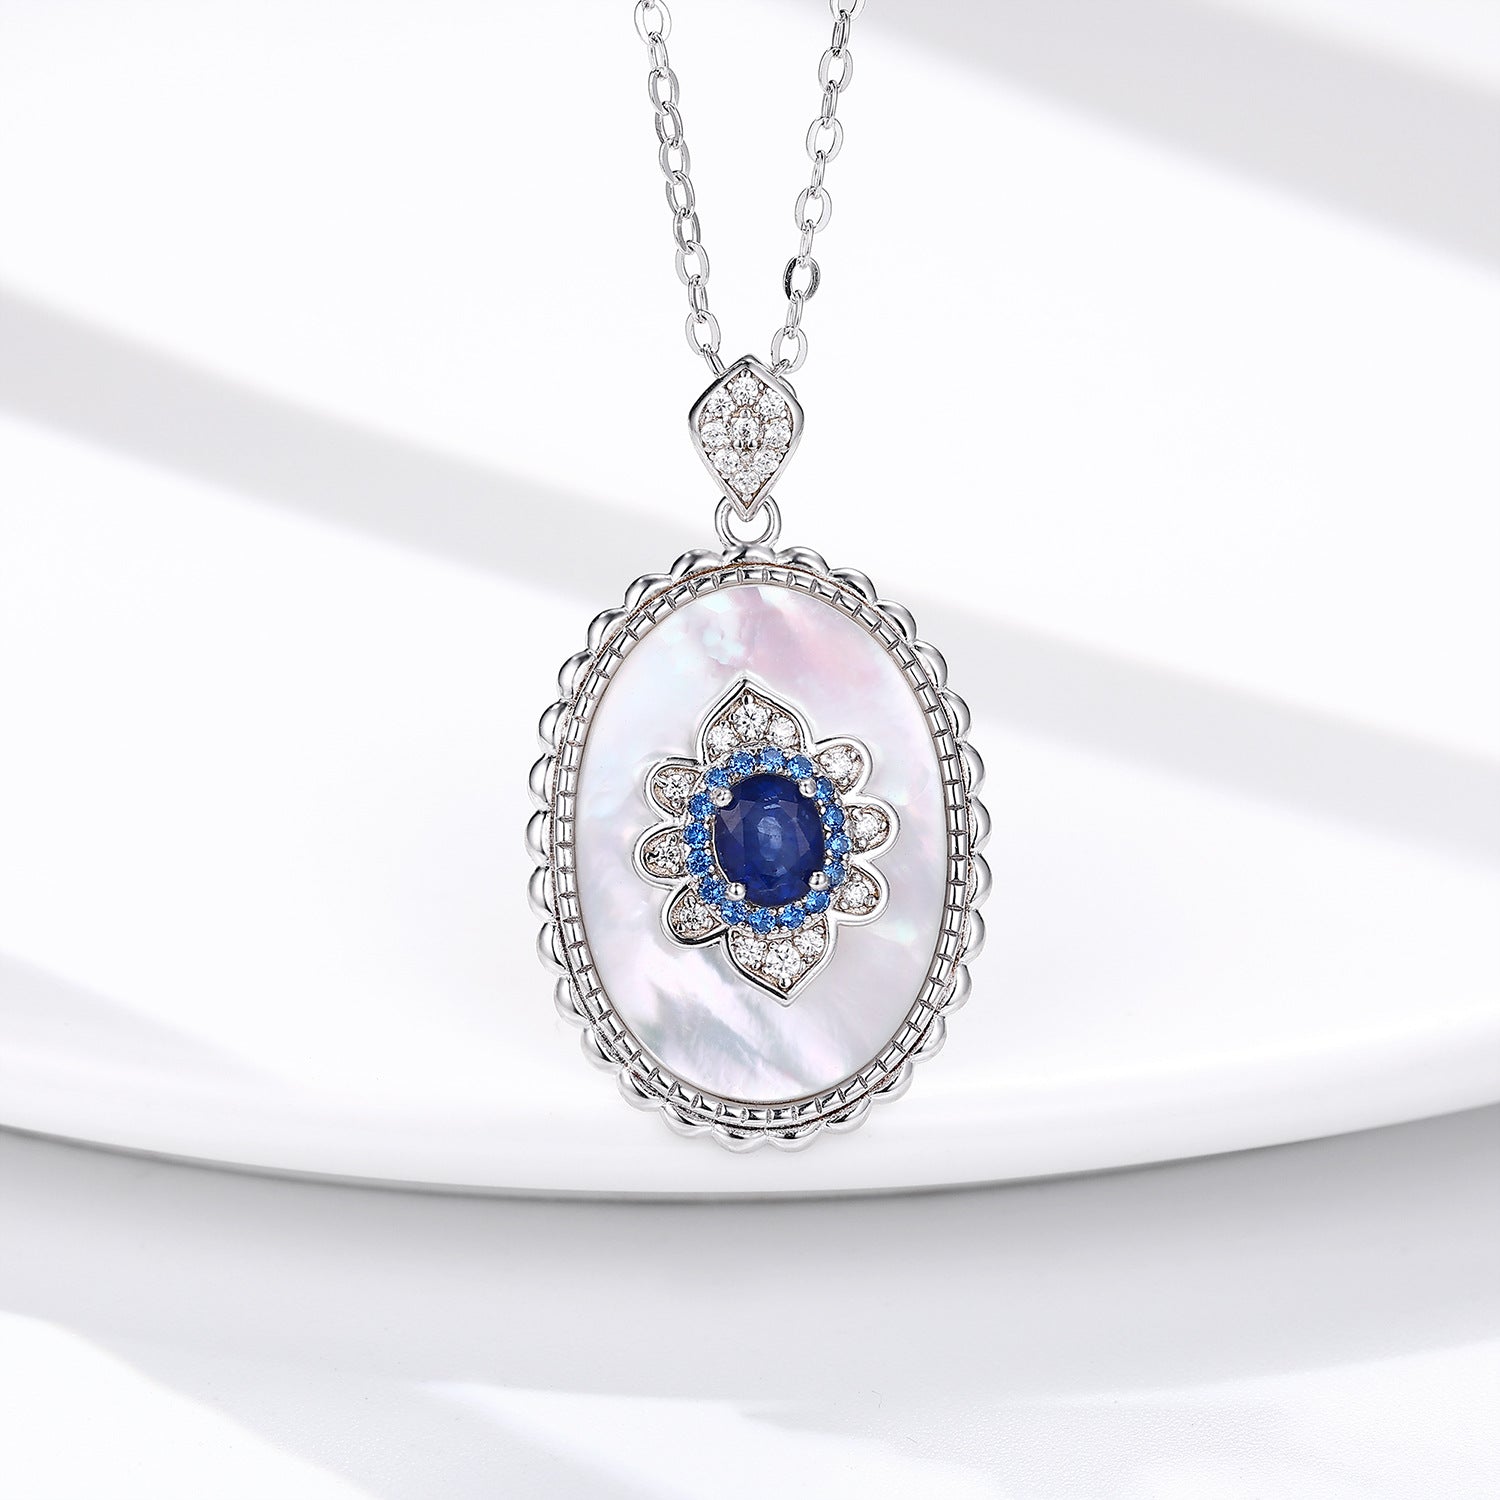 Sapphire Diamond Pendant - 925 Sterling Silver Chain Necklace for Women